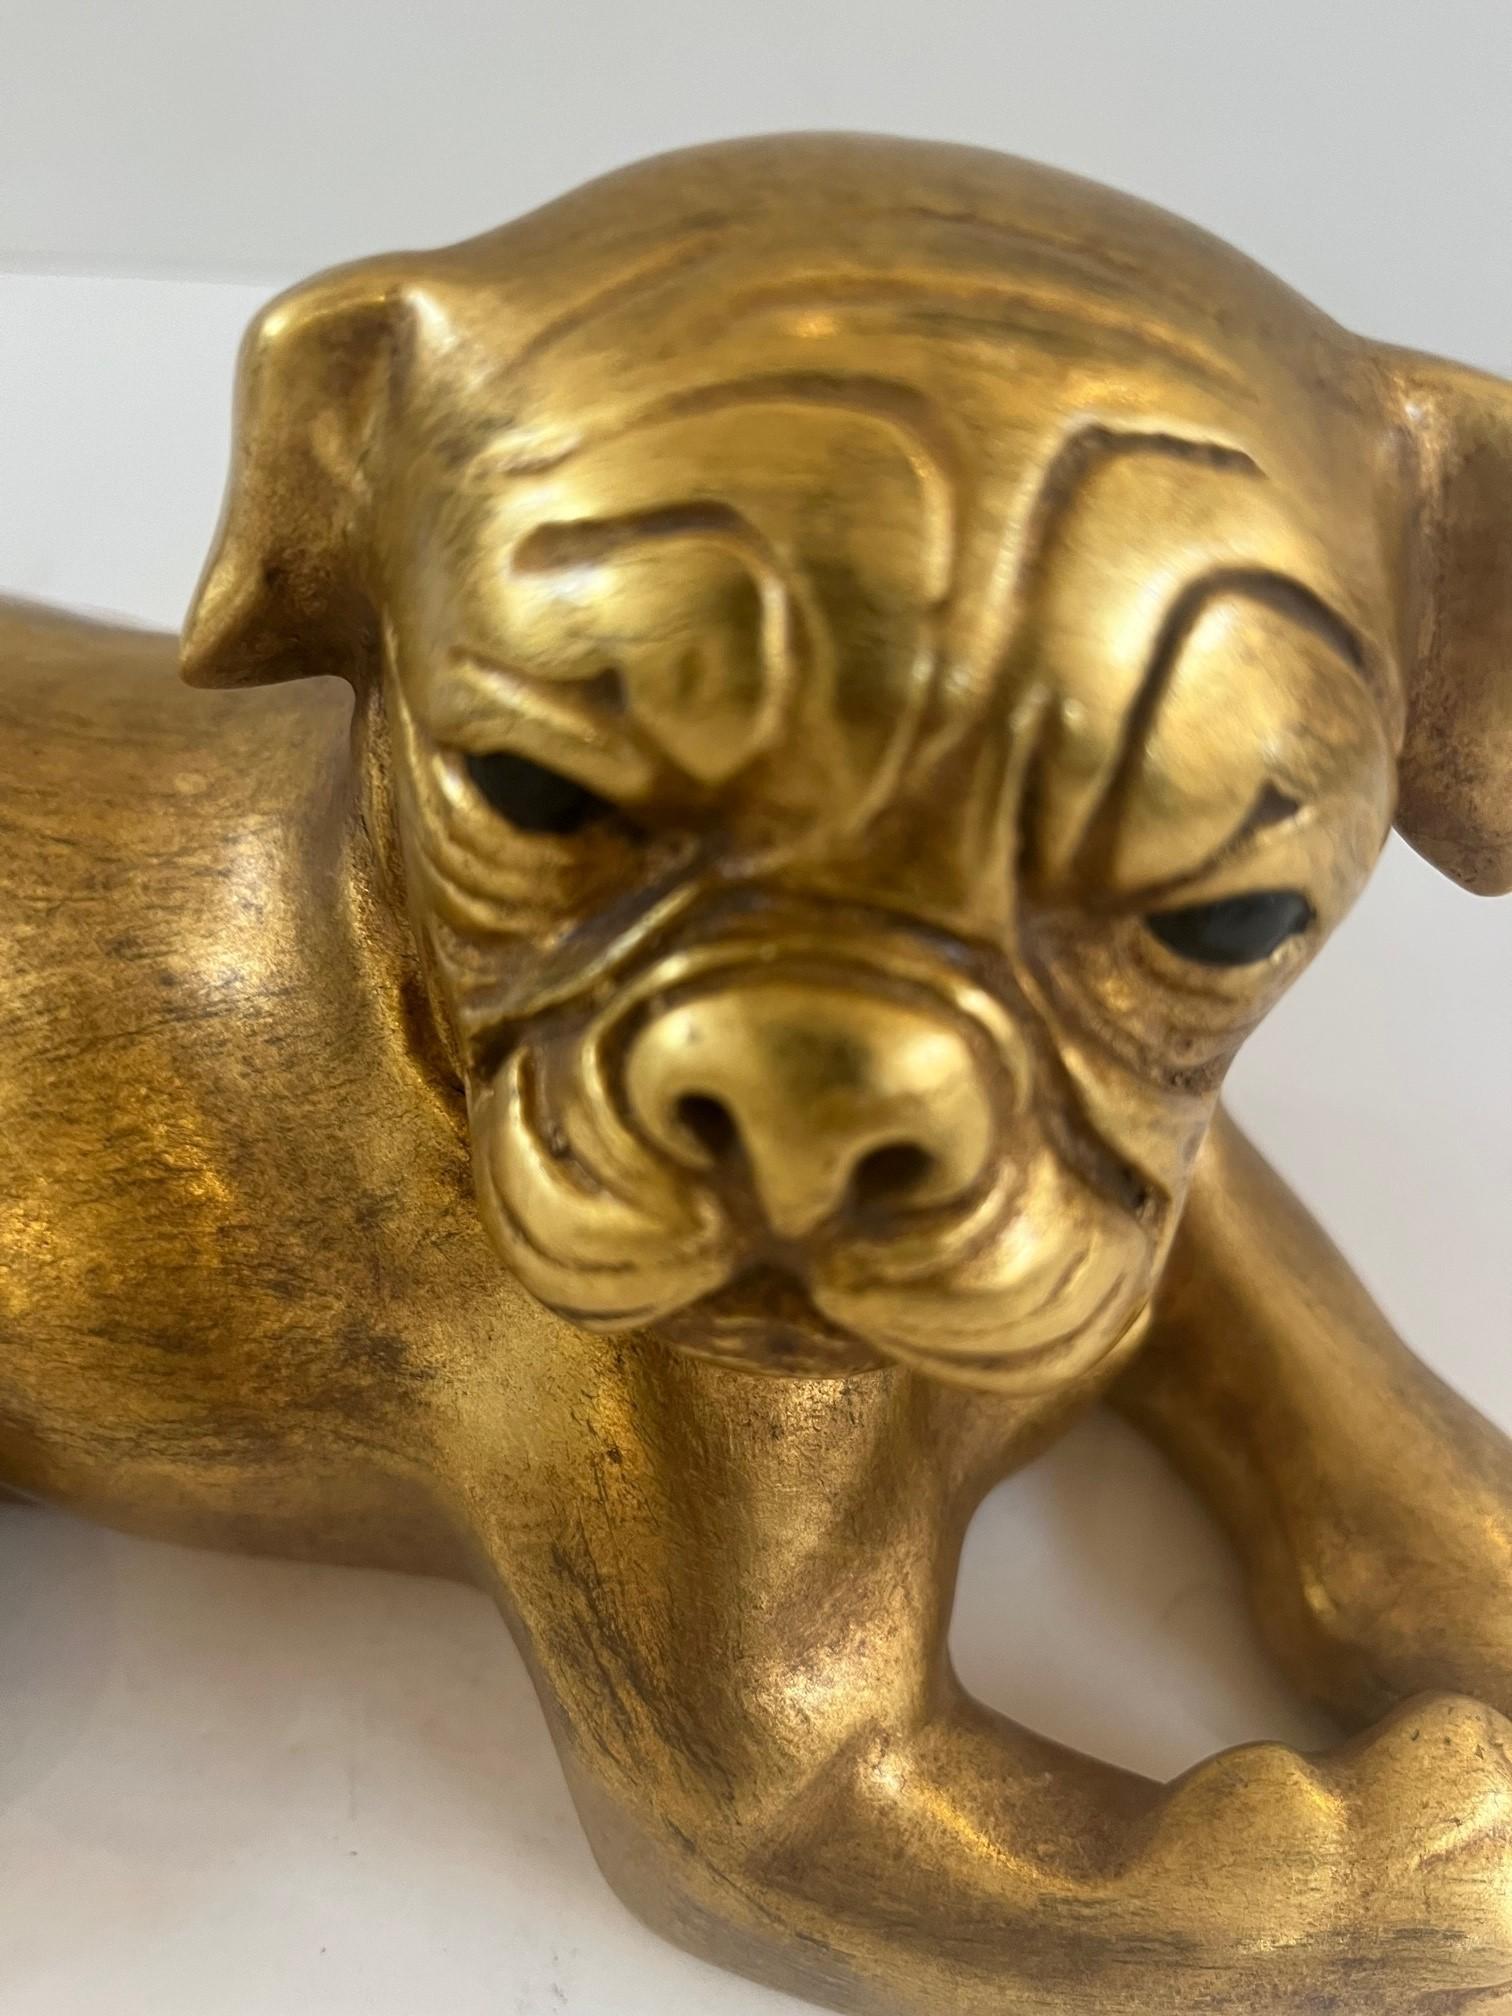 Vintage Bronze Cast Newly Refinished (Gilded) Resting Pug Dog Art Sculpture by Maitland Smith 